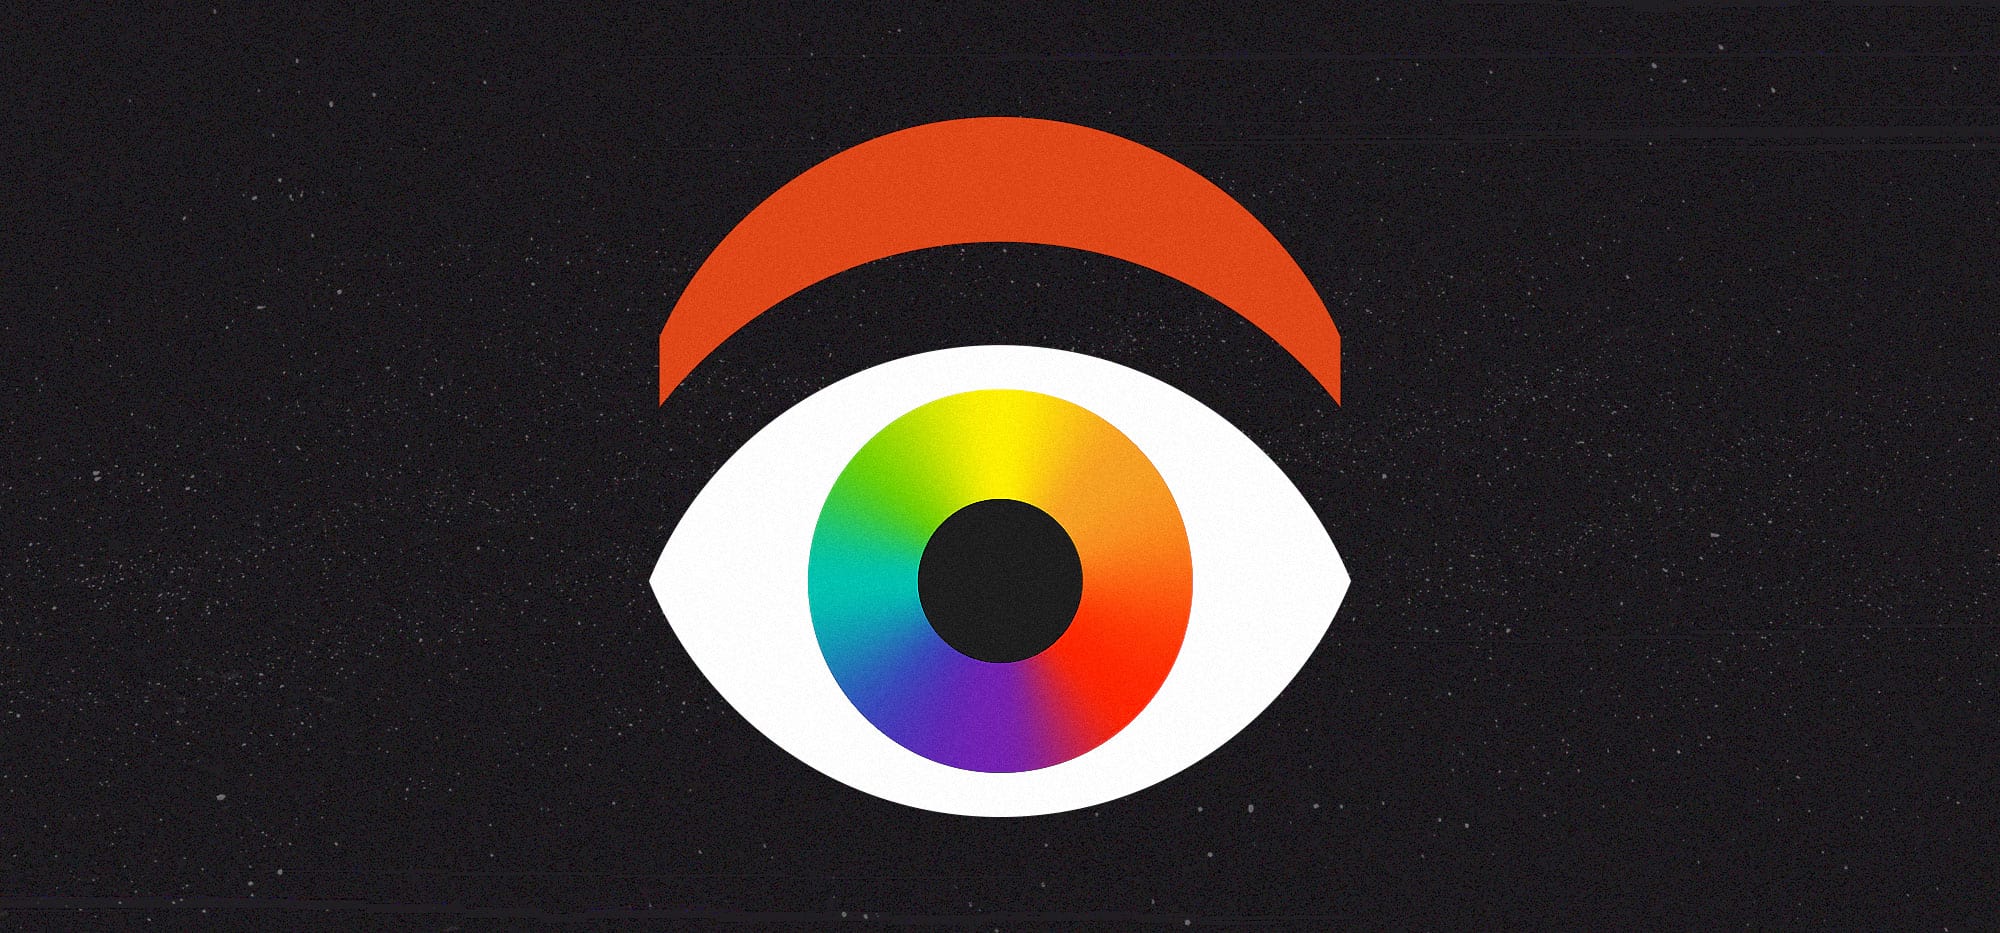 Vector eye with the iris the color of the rainbow and a background full of stars and groovy colors showing the spectrum of light humans see